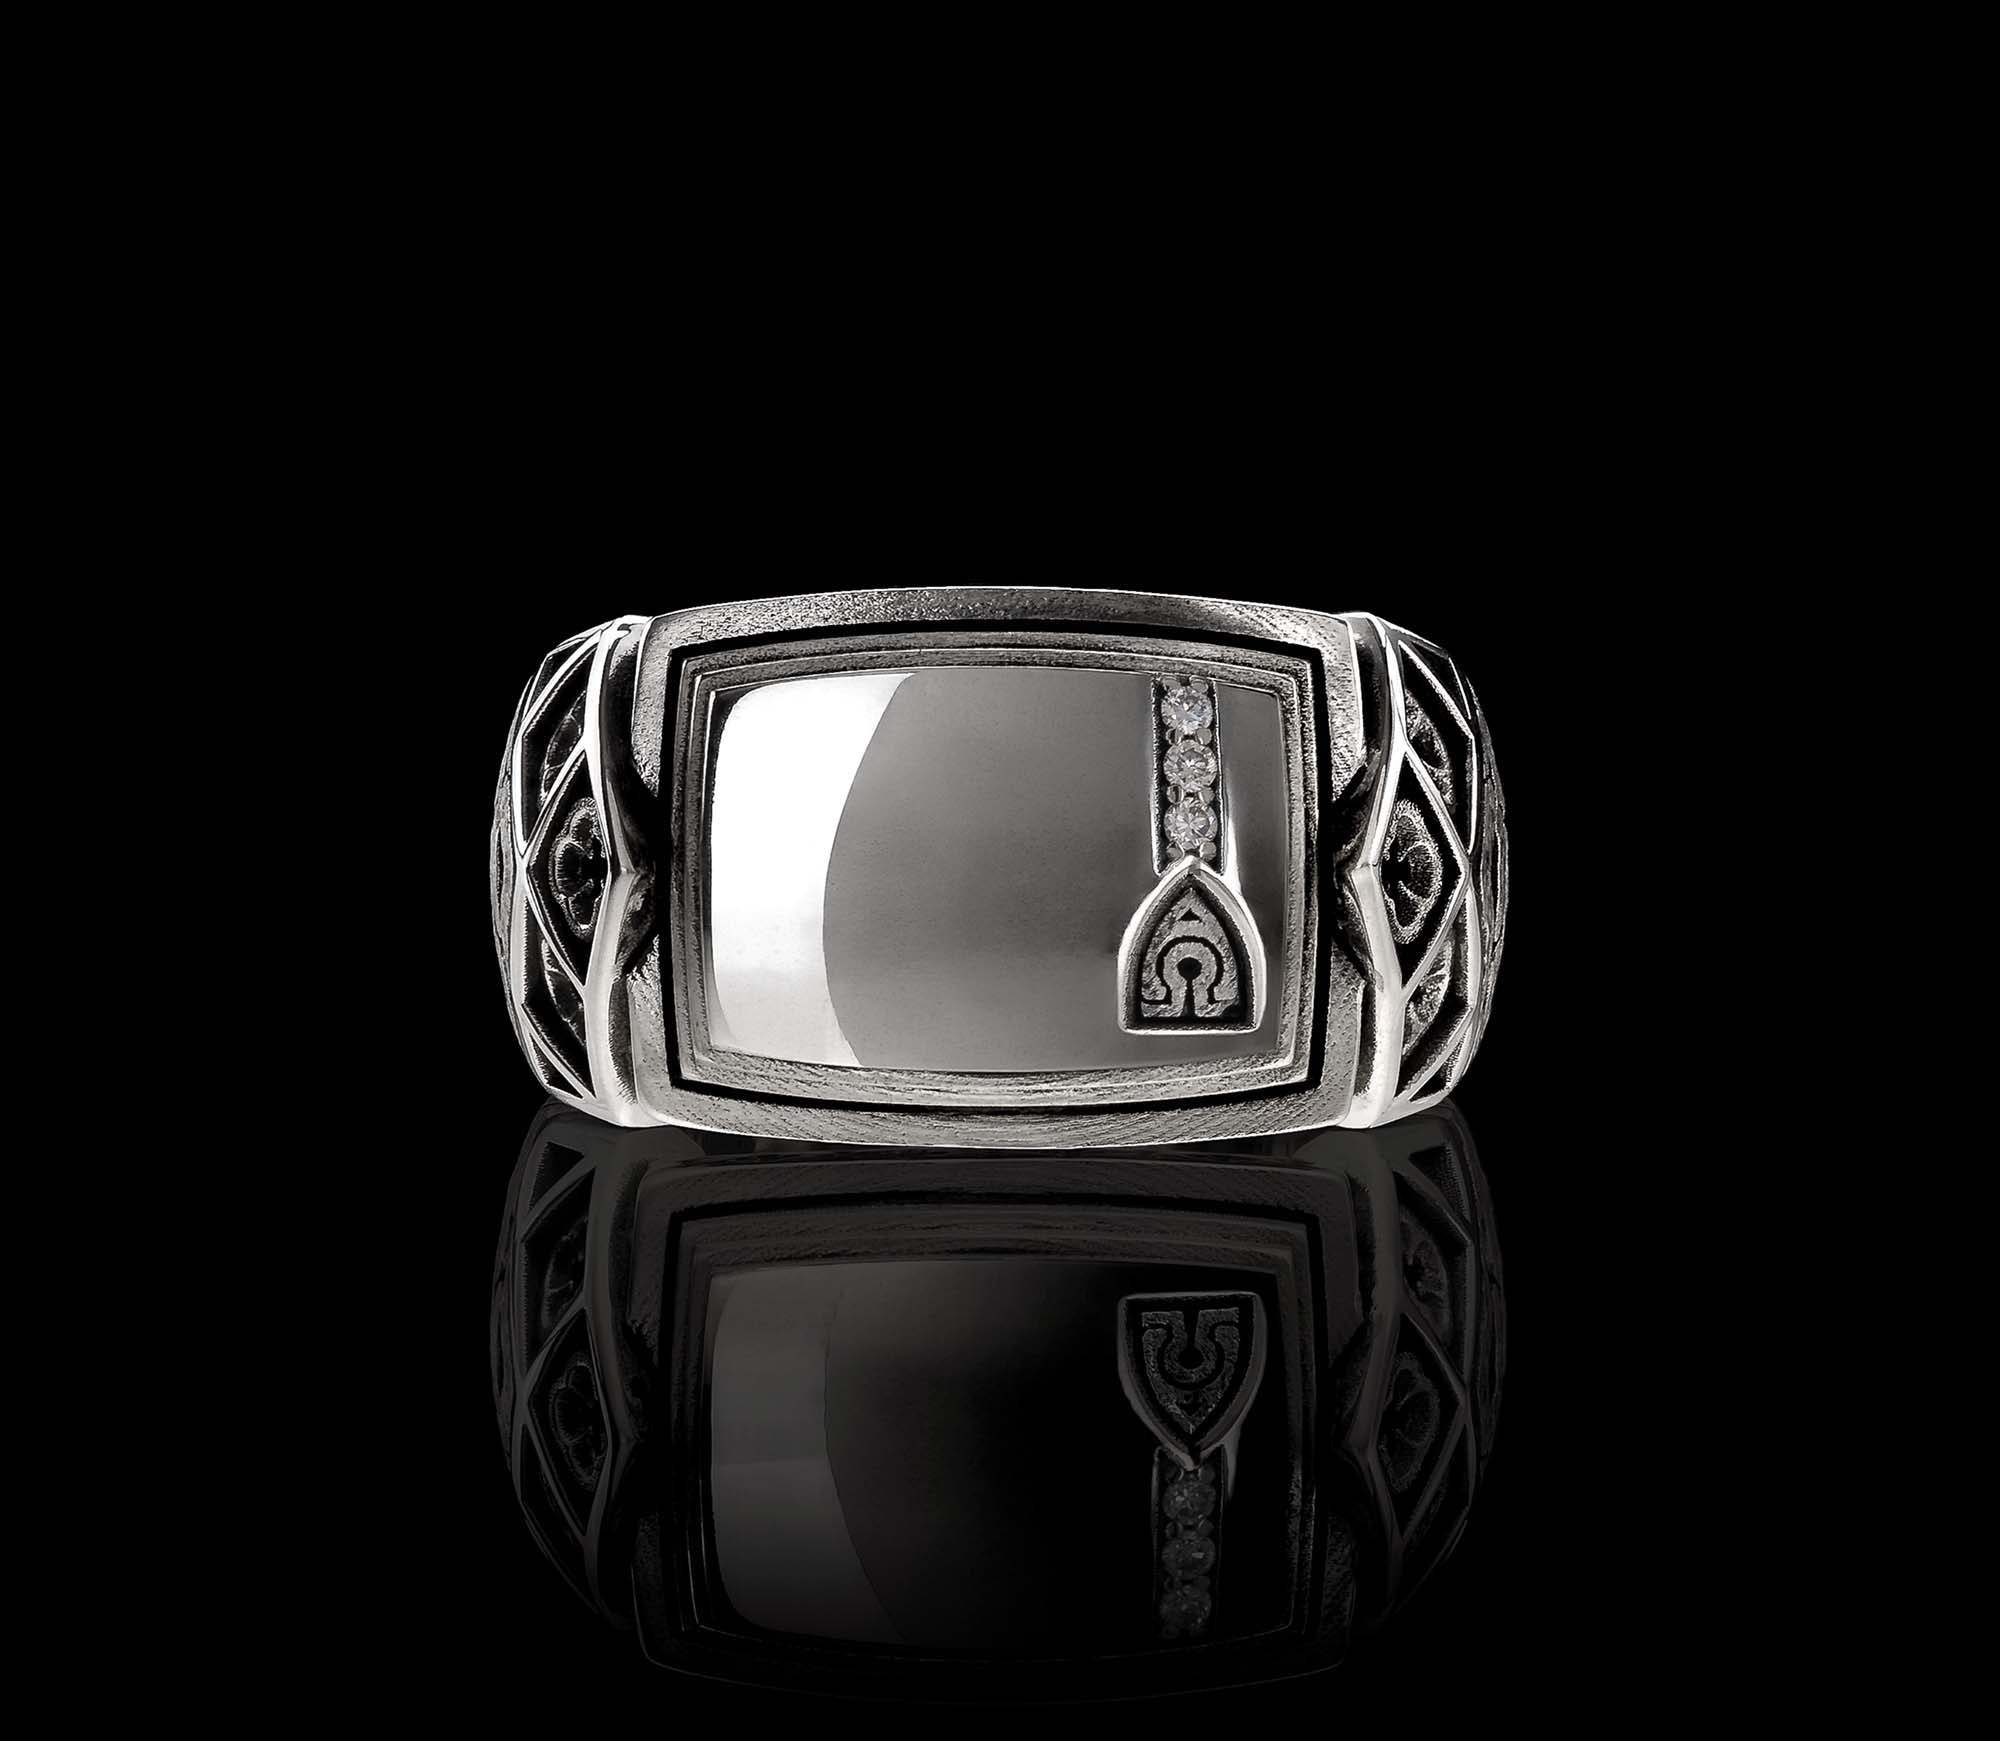 Conviction Band Ring in 925 Sterling Silver with Moissanite Gemstones